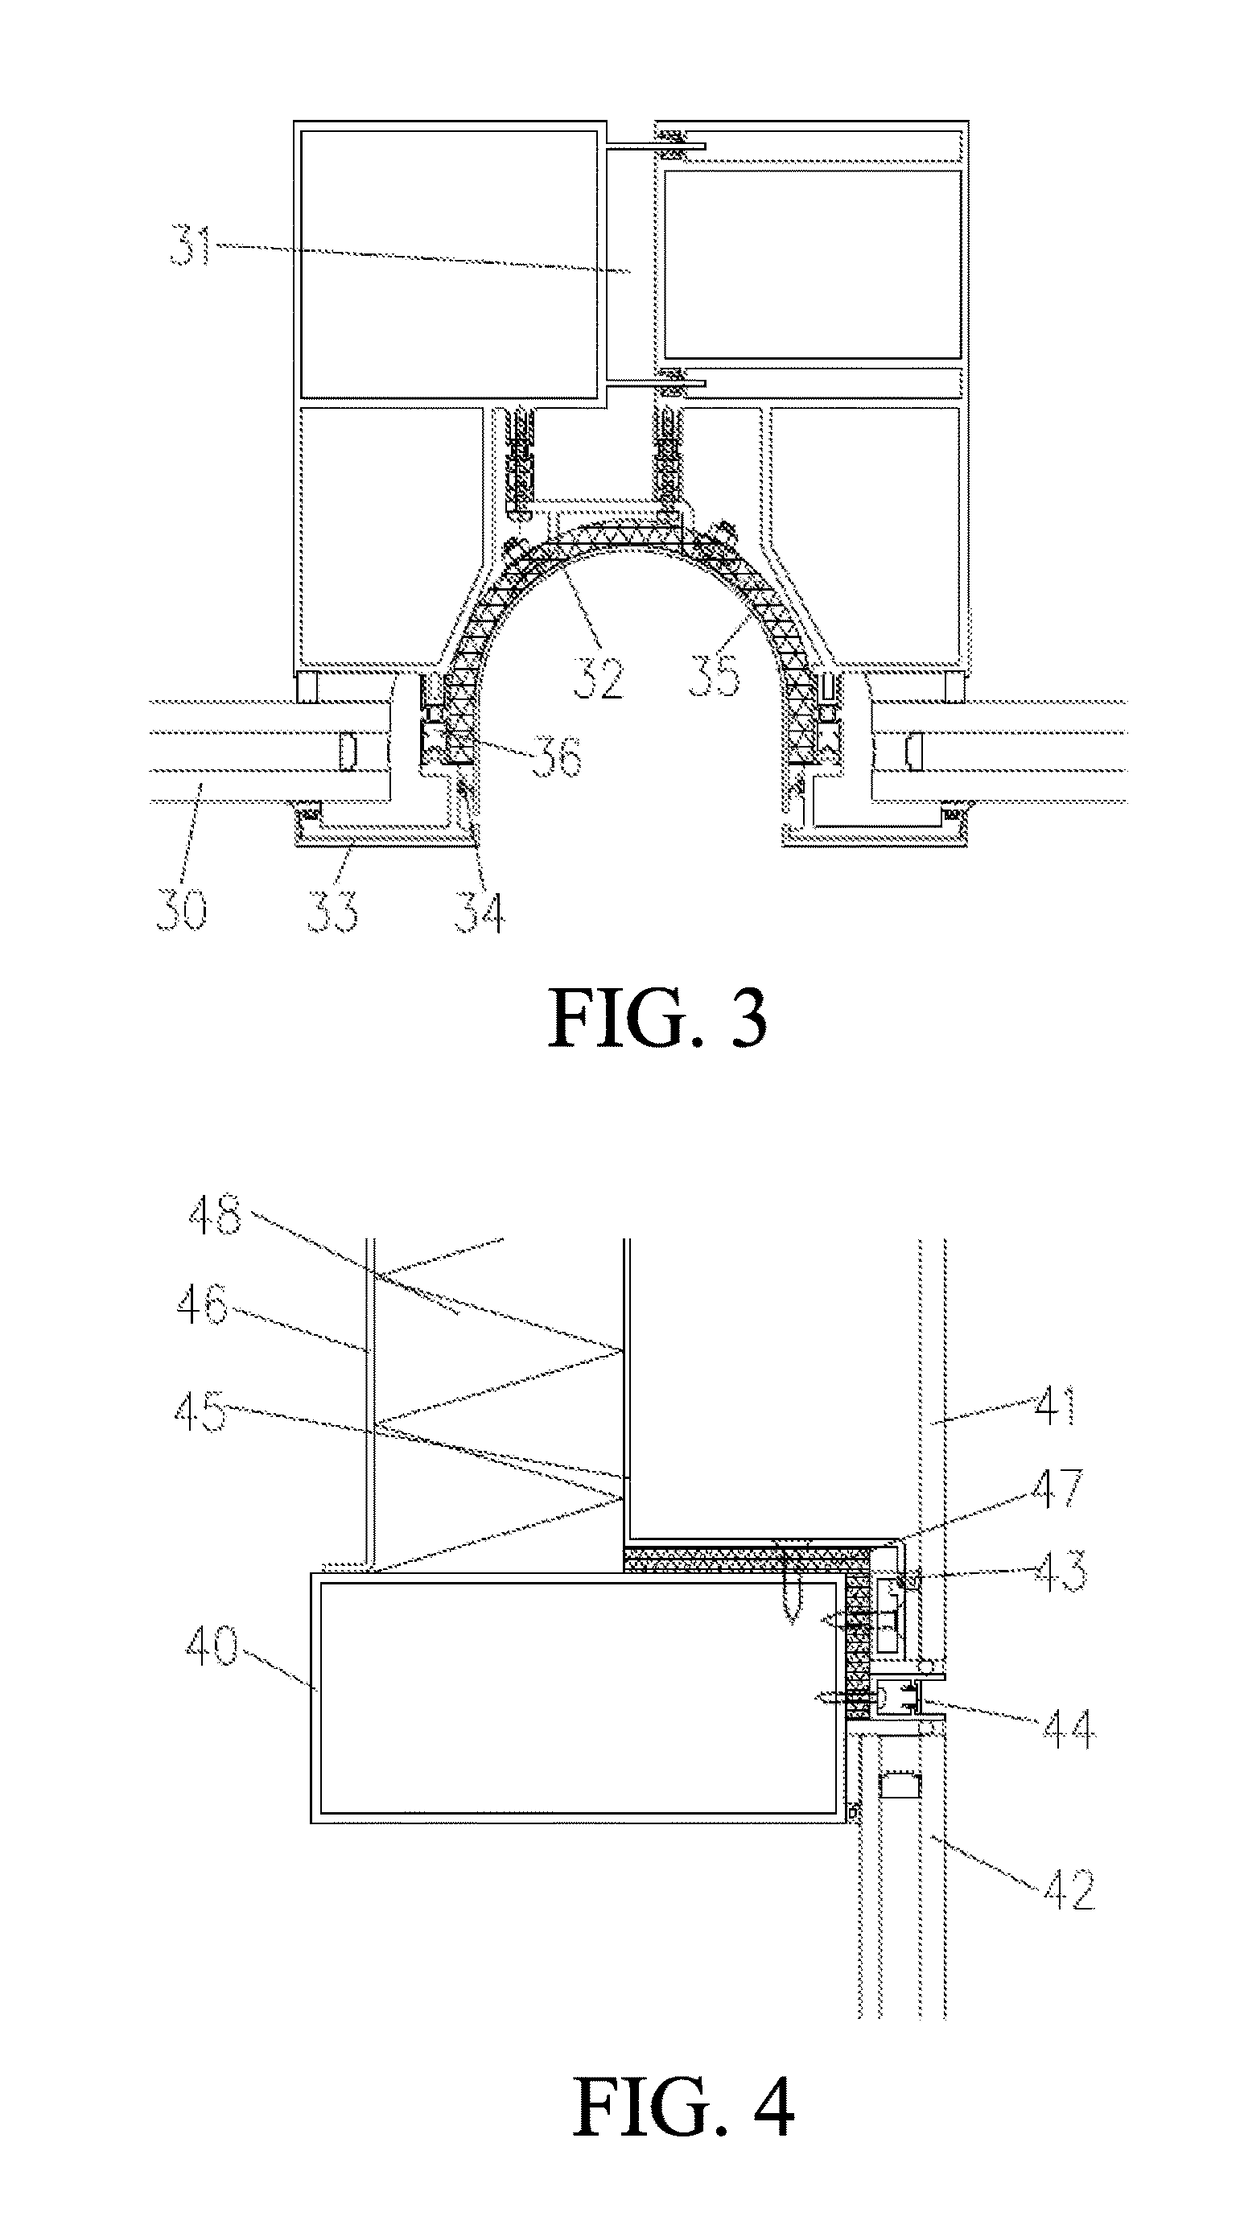 Structure for blocking heat transfer through thermal bridge of curtain wall building